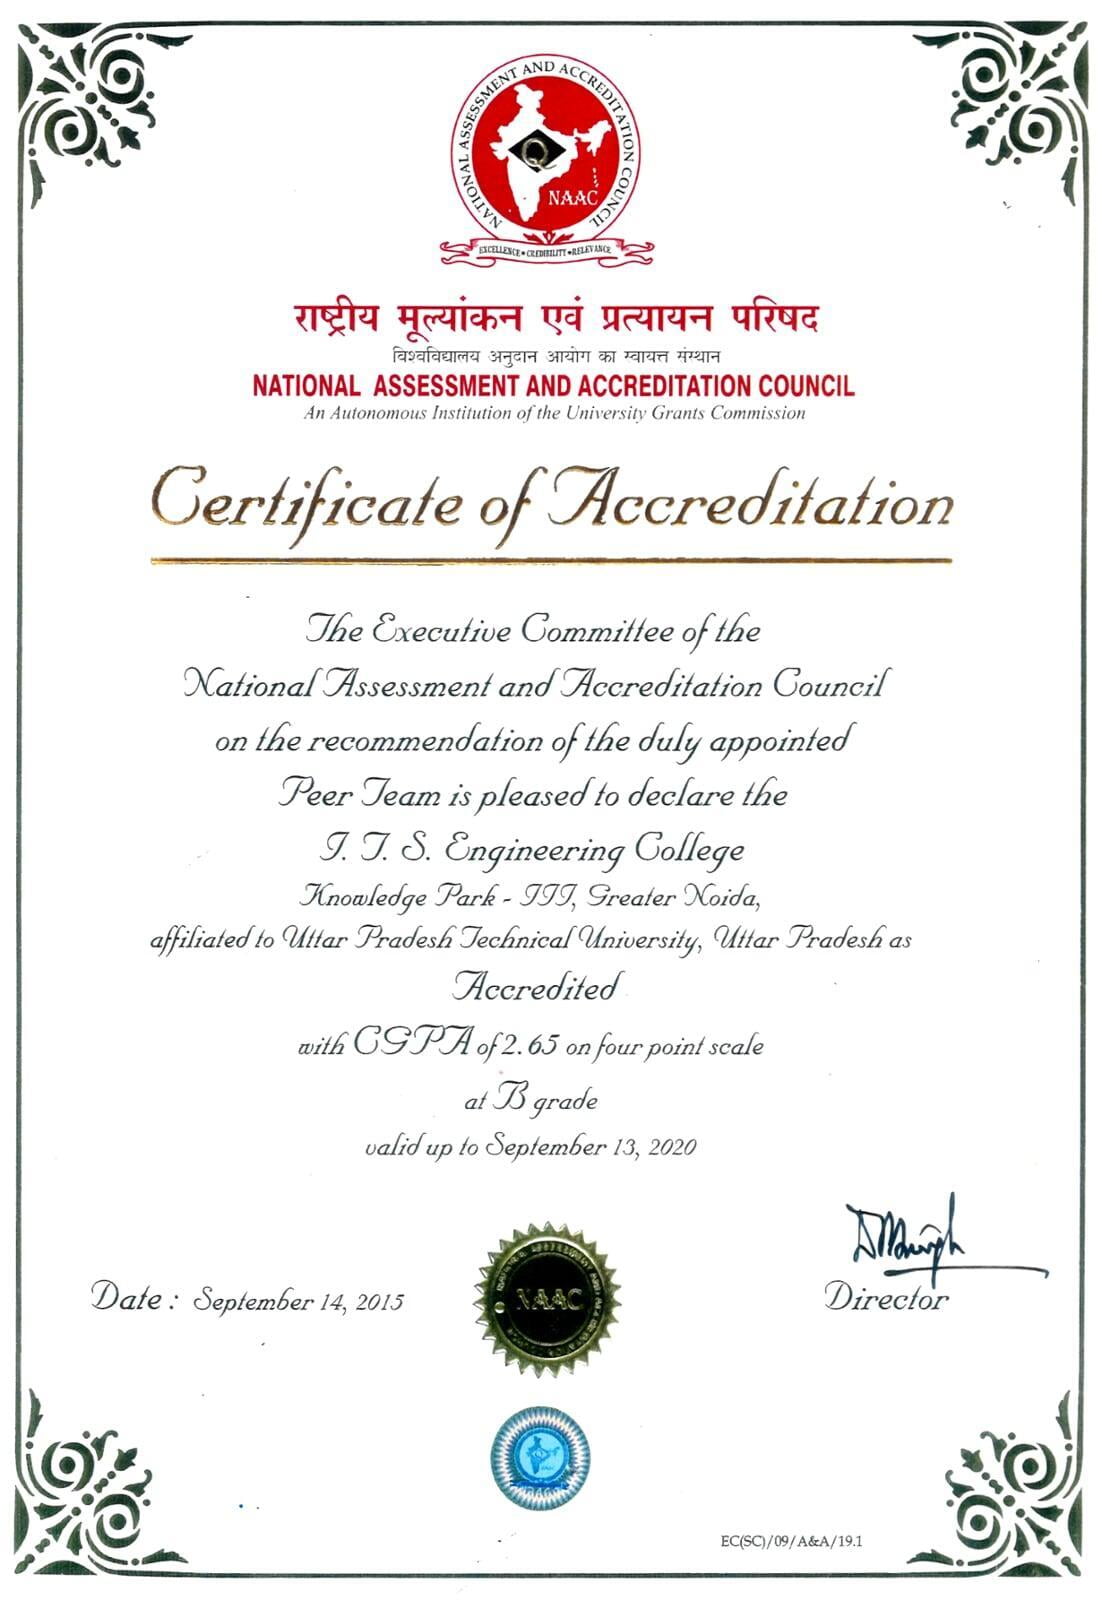 NAAC Certificate ITS Engineering College